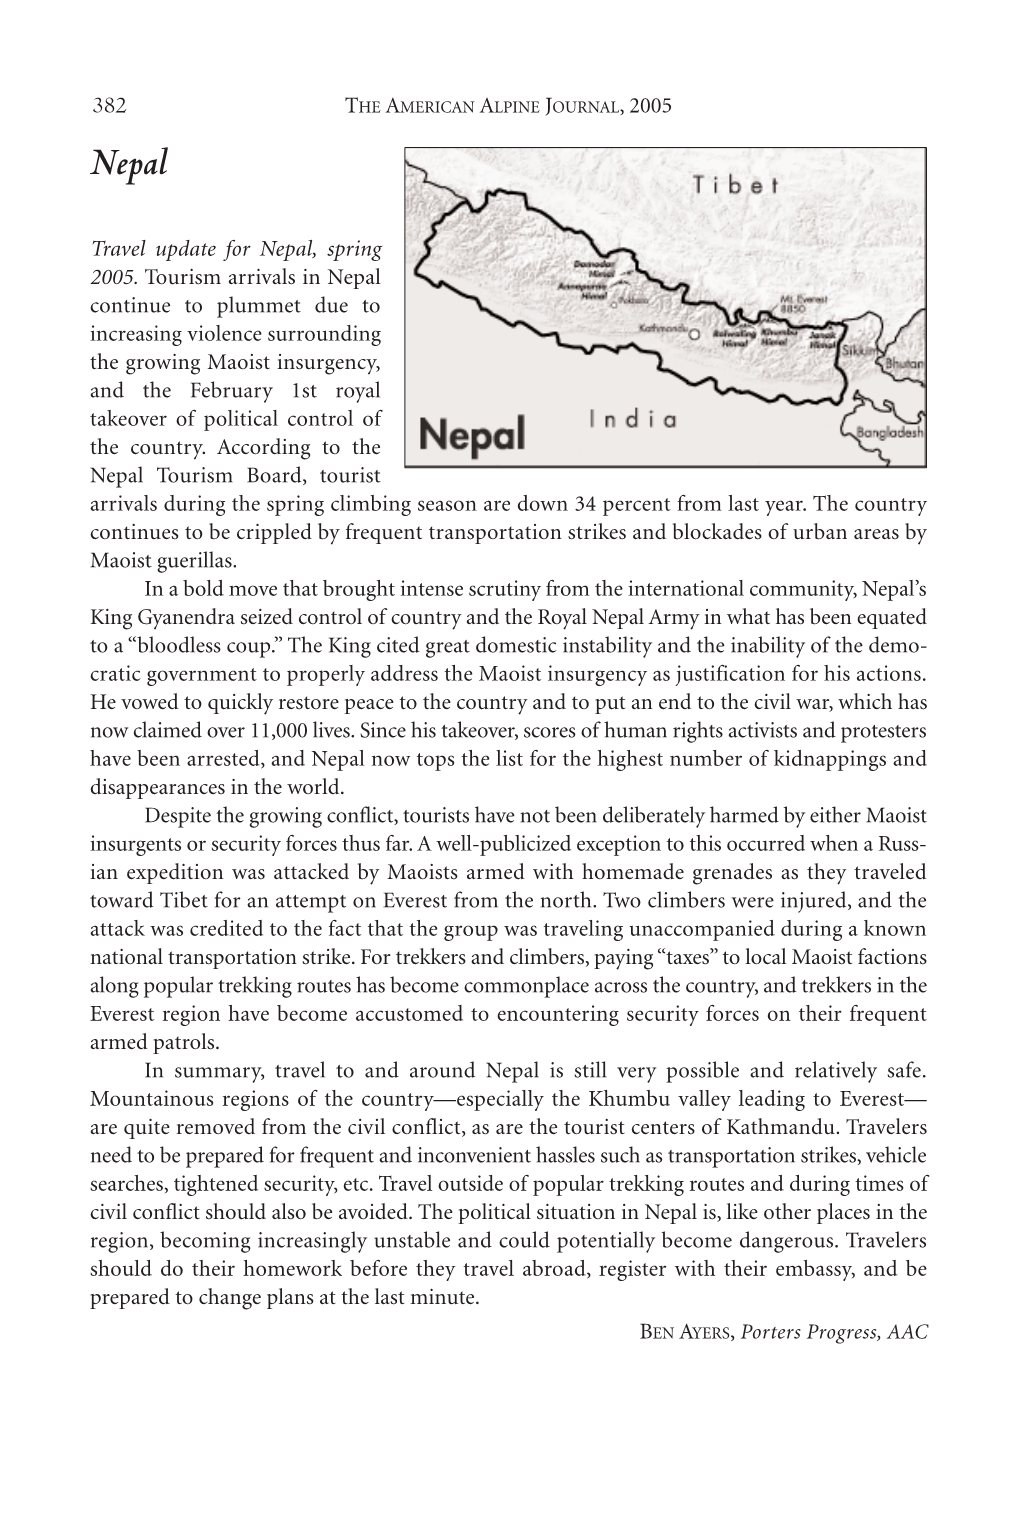 Travel Update for Nepal, Spring 2005. Tourism Arrivals in Nepal Continue